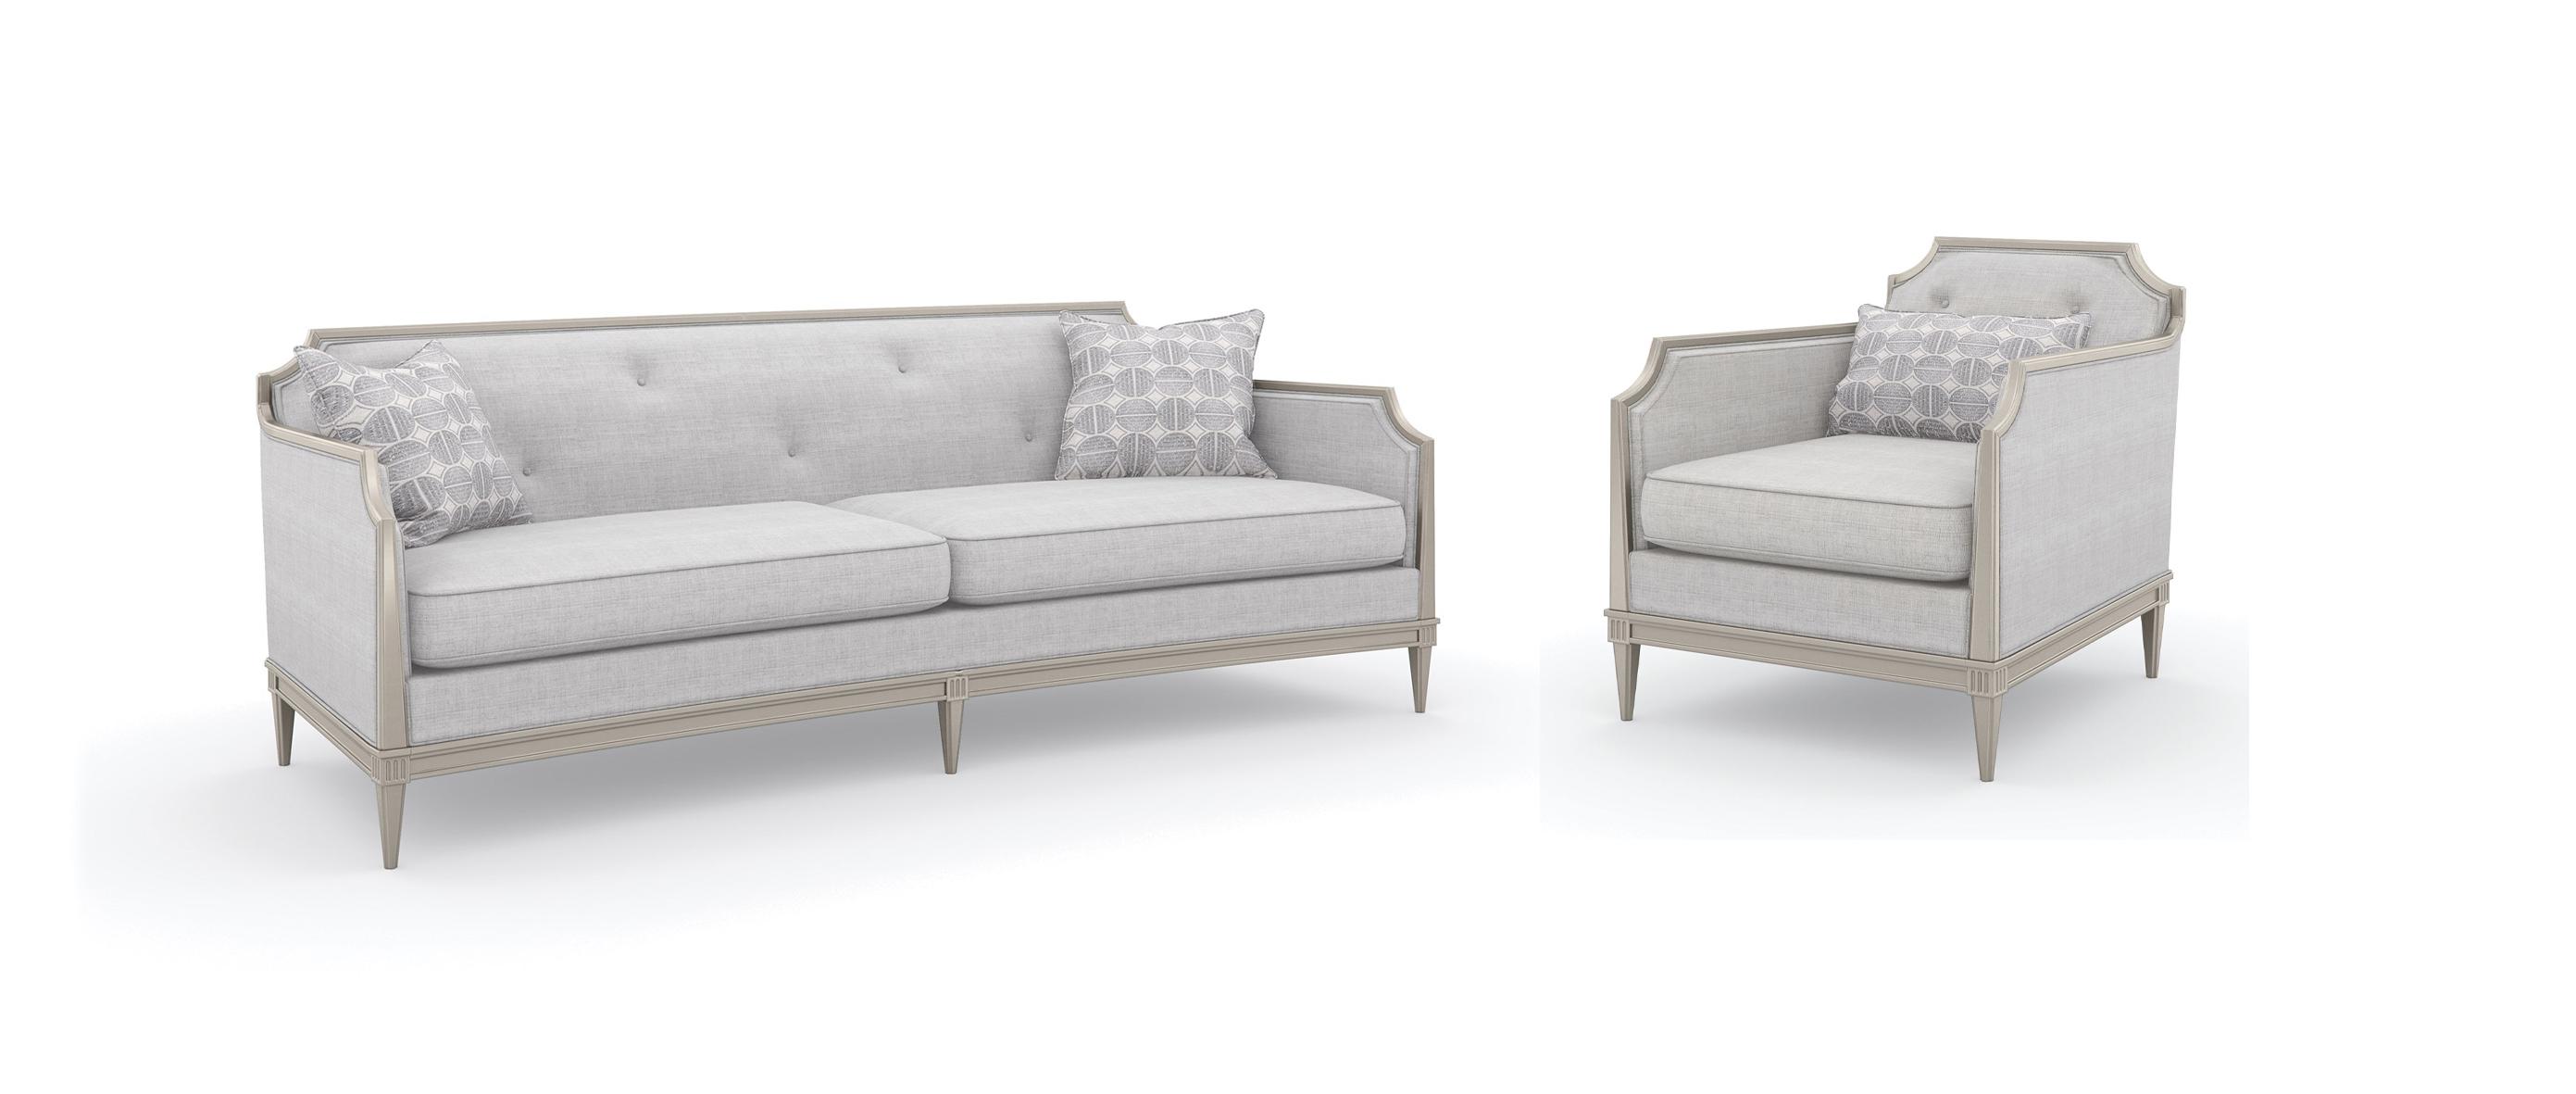 Contemporary Sofa and Chair FRAME OF REFERENCE UPH-416-113-B-Set-2 in Pearl Velvet